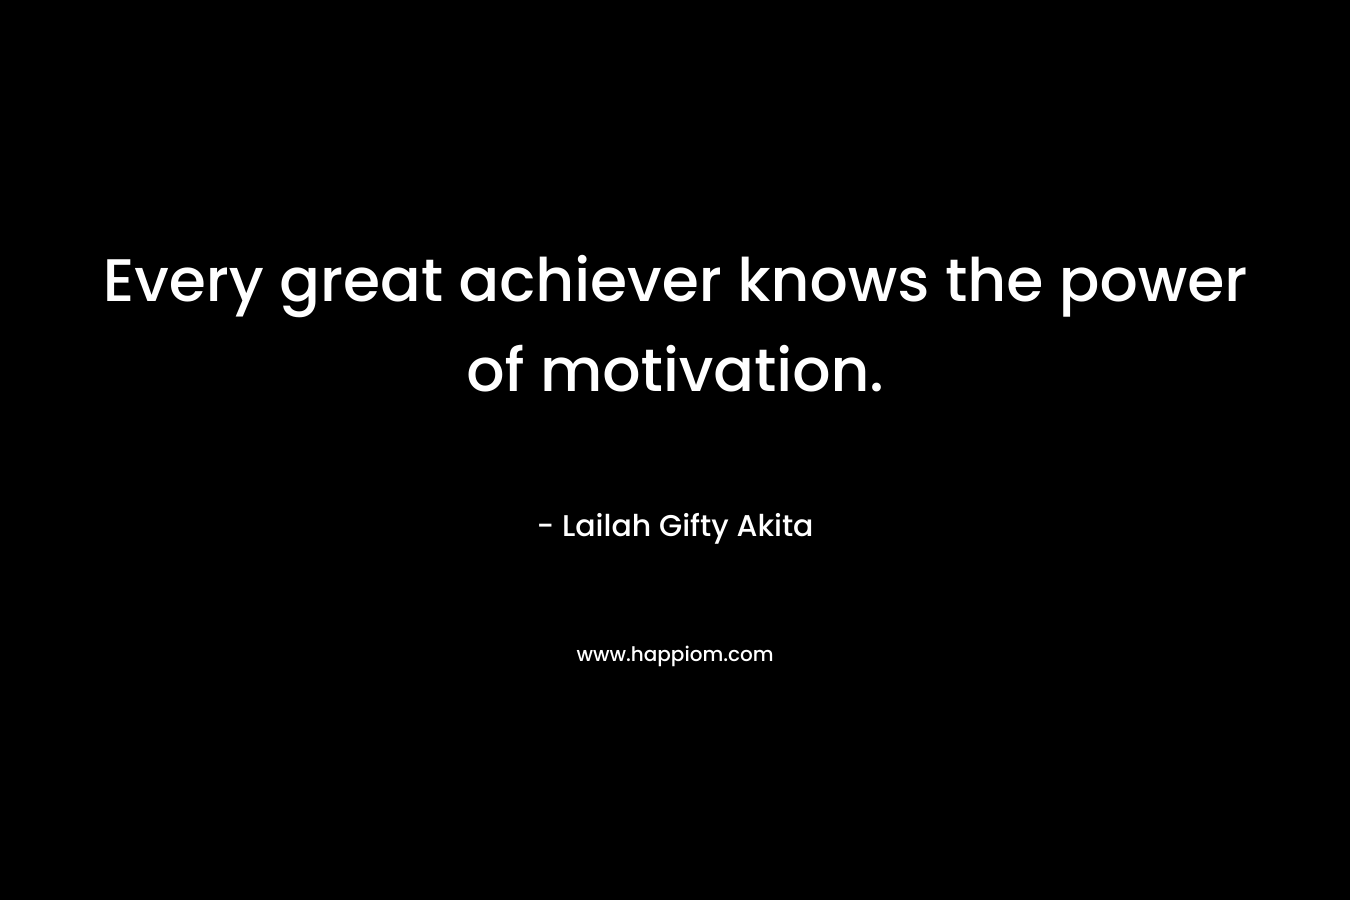 Every great achiever knows the power of motivation.